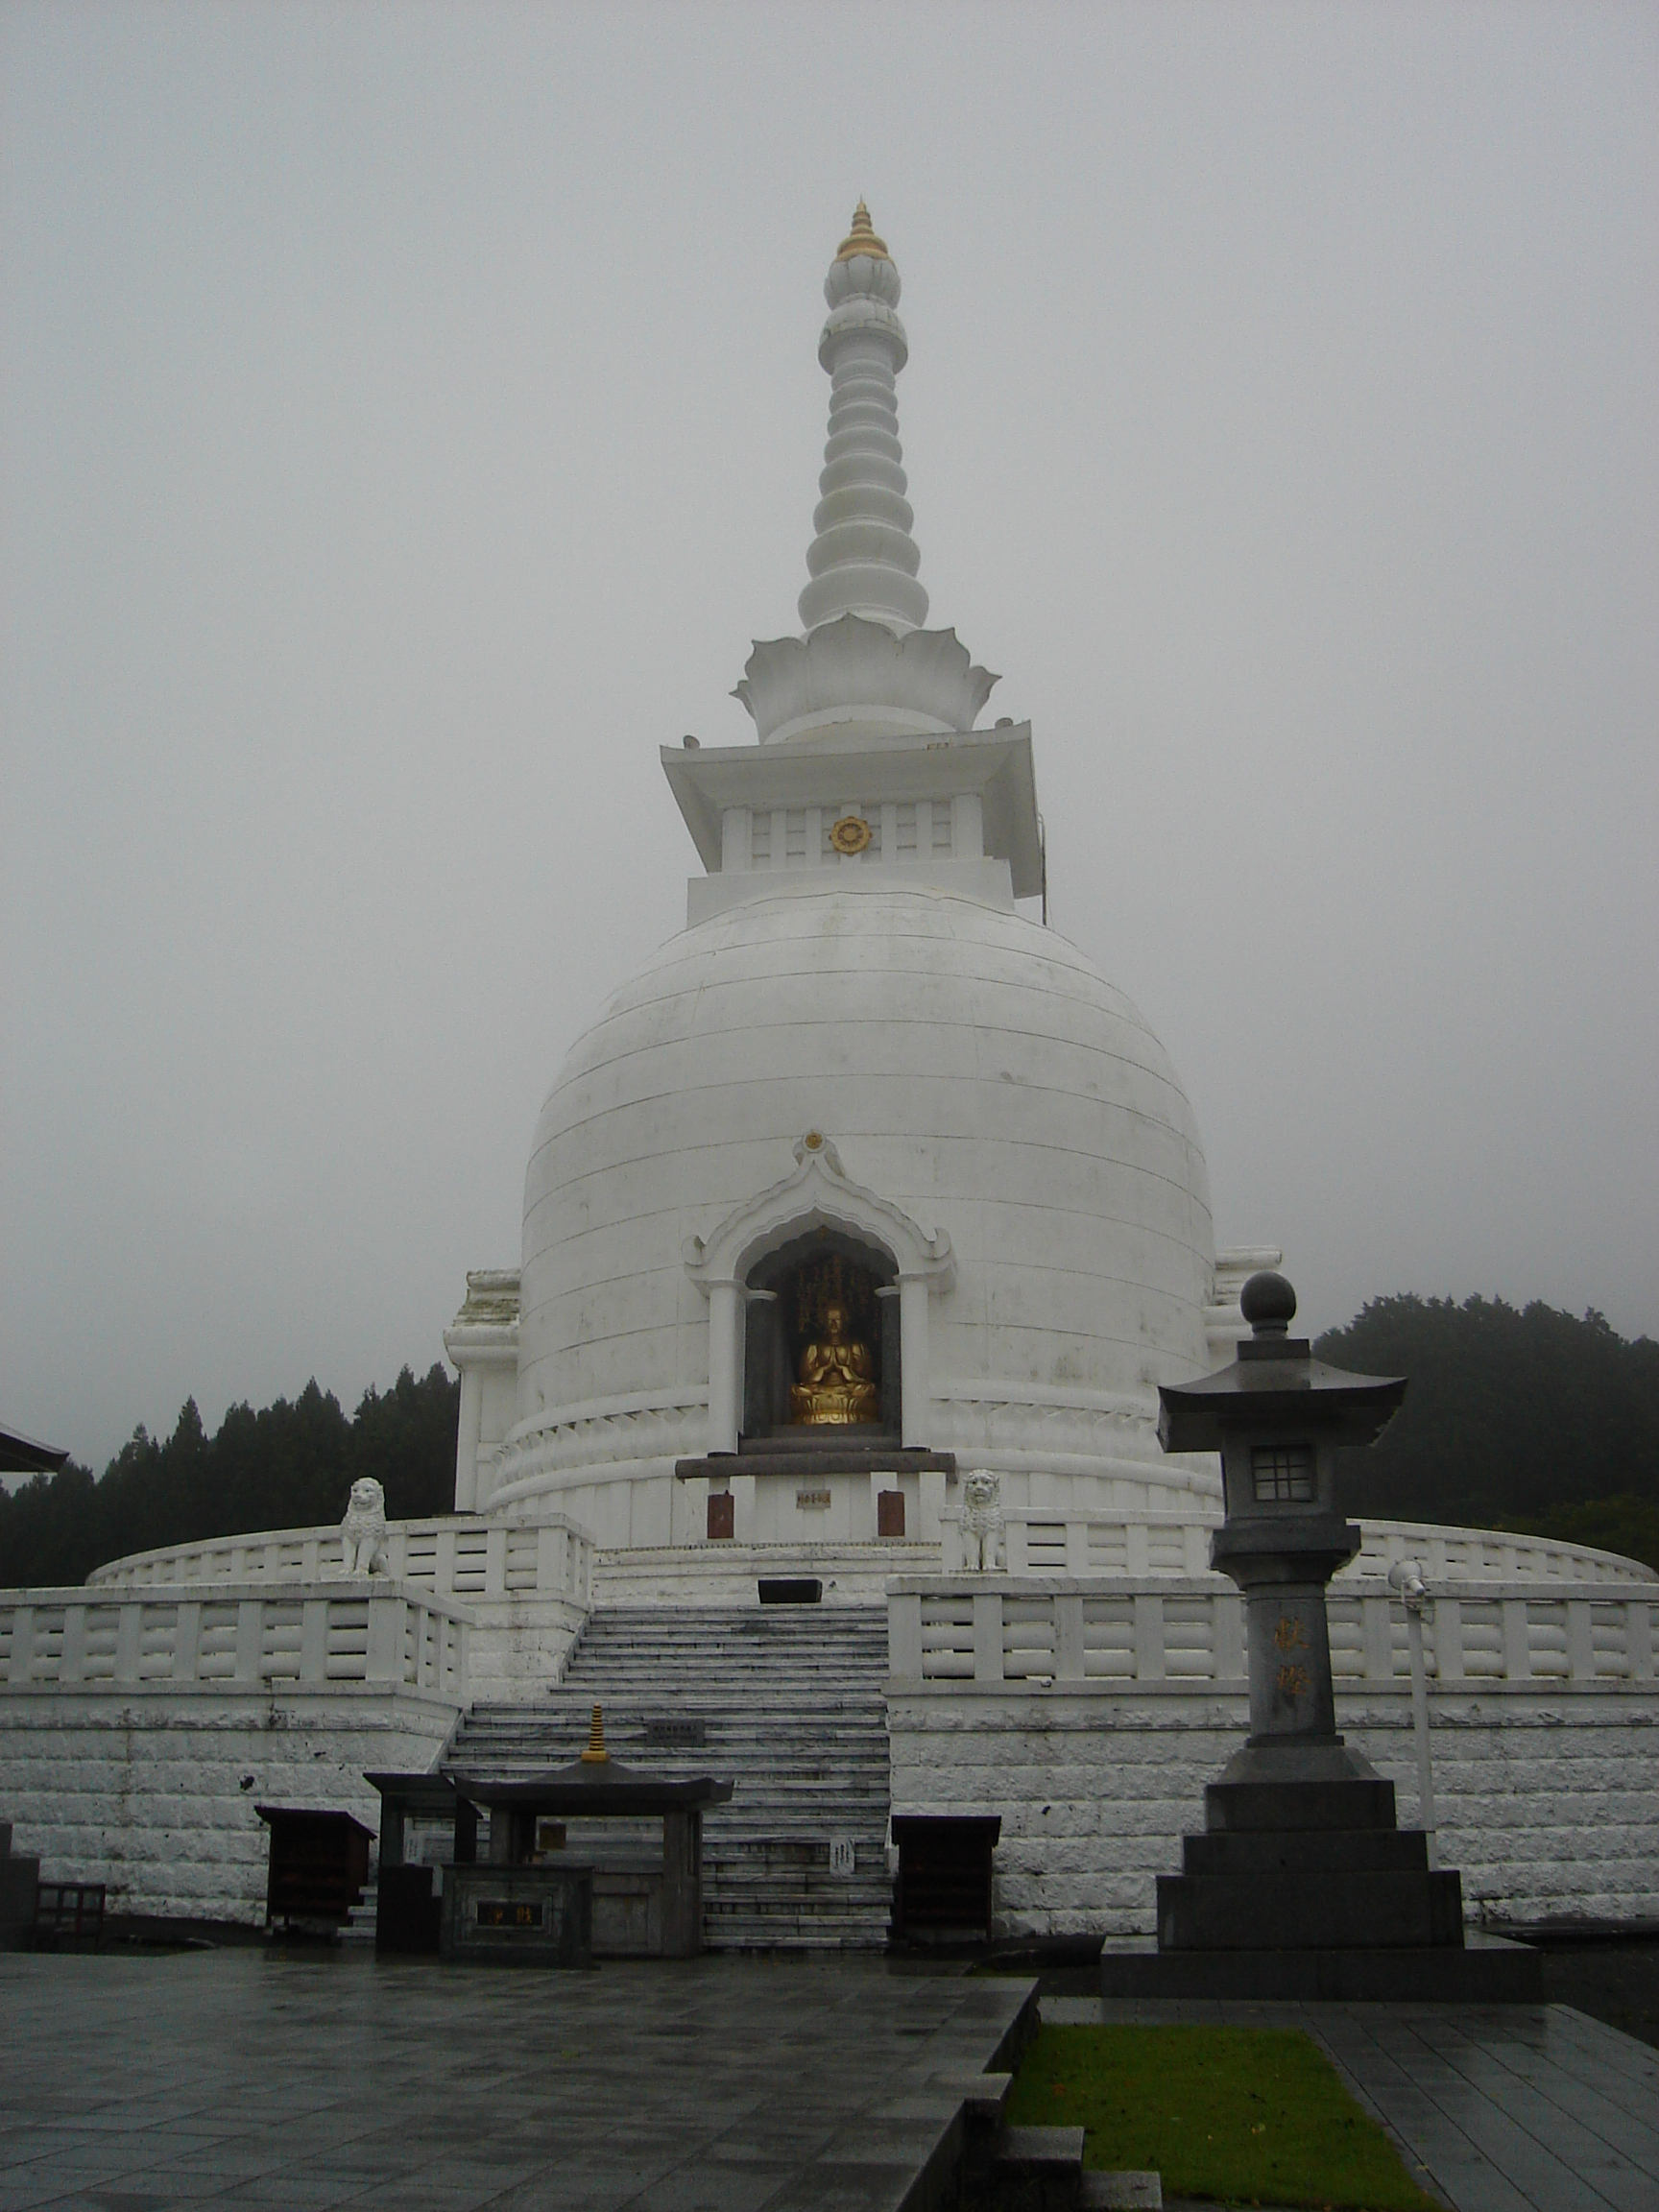 white dome with a spire and gold statue